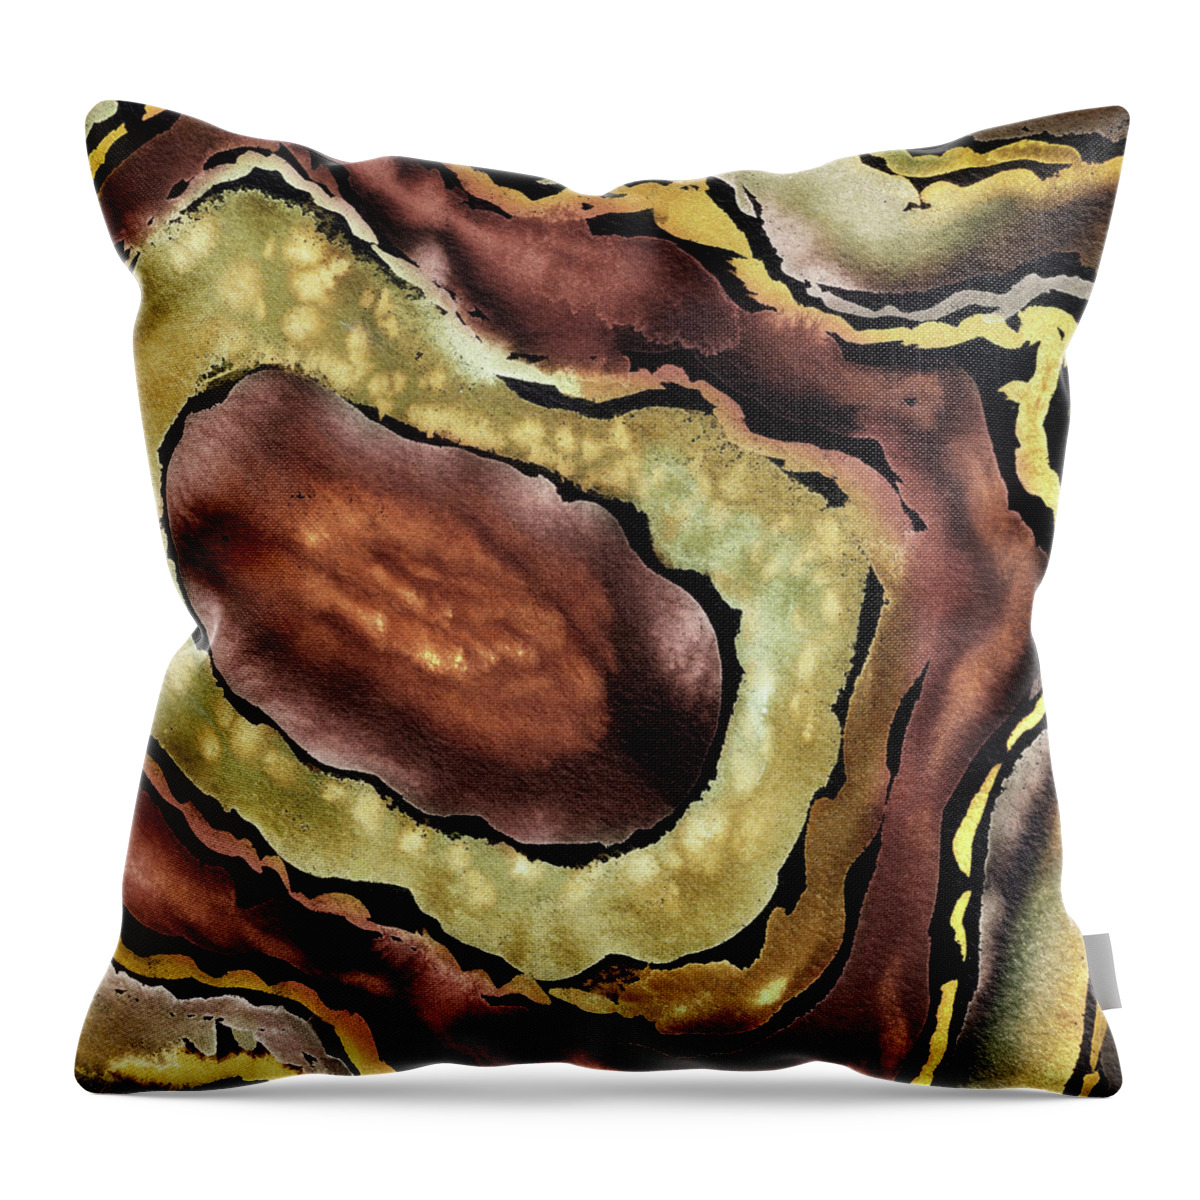 Brown Abstract Throw Pillow featuring the painting Organic Lines Of Terra Beige Brown Stone Texture III by Irina Sztukowski